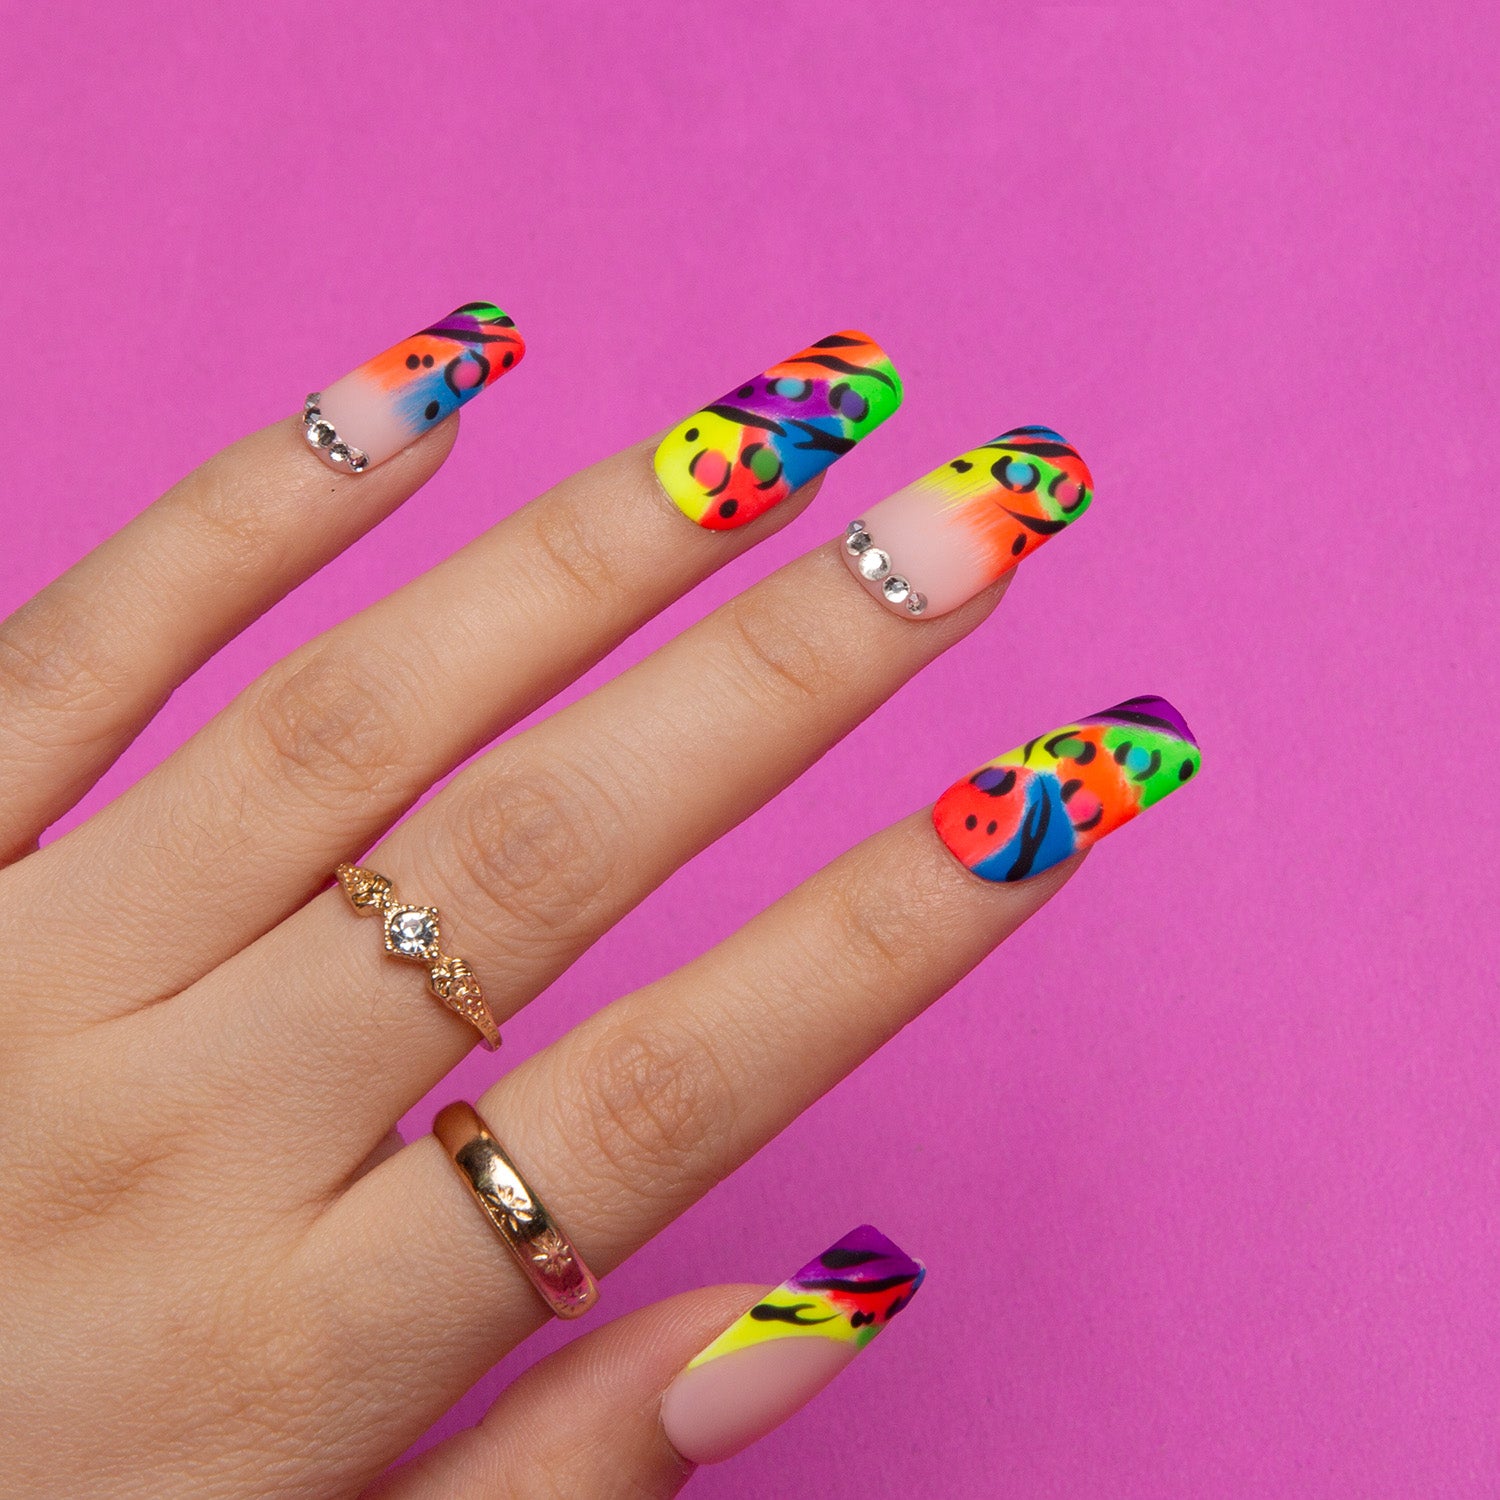 Colorful square press-on nails with bright French tips, vibrant leopard prints, and silver rhinestones against a pink background